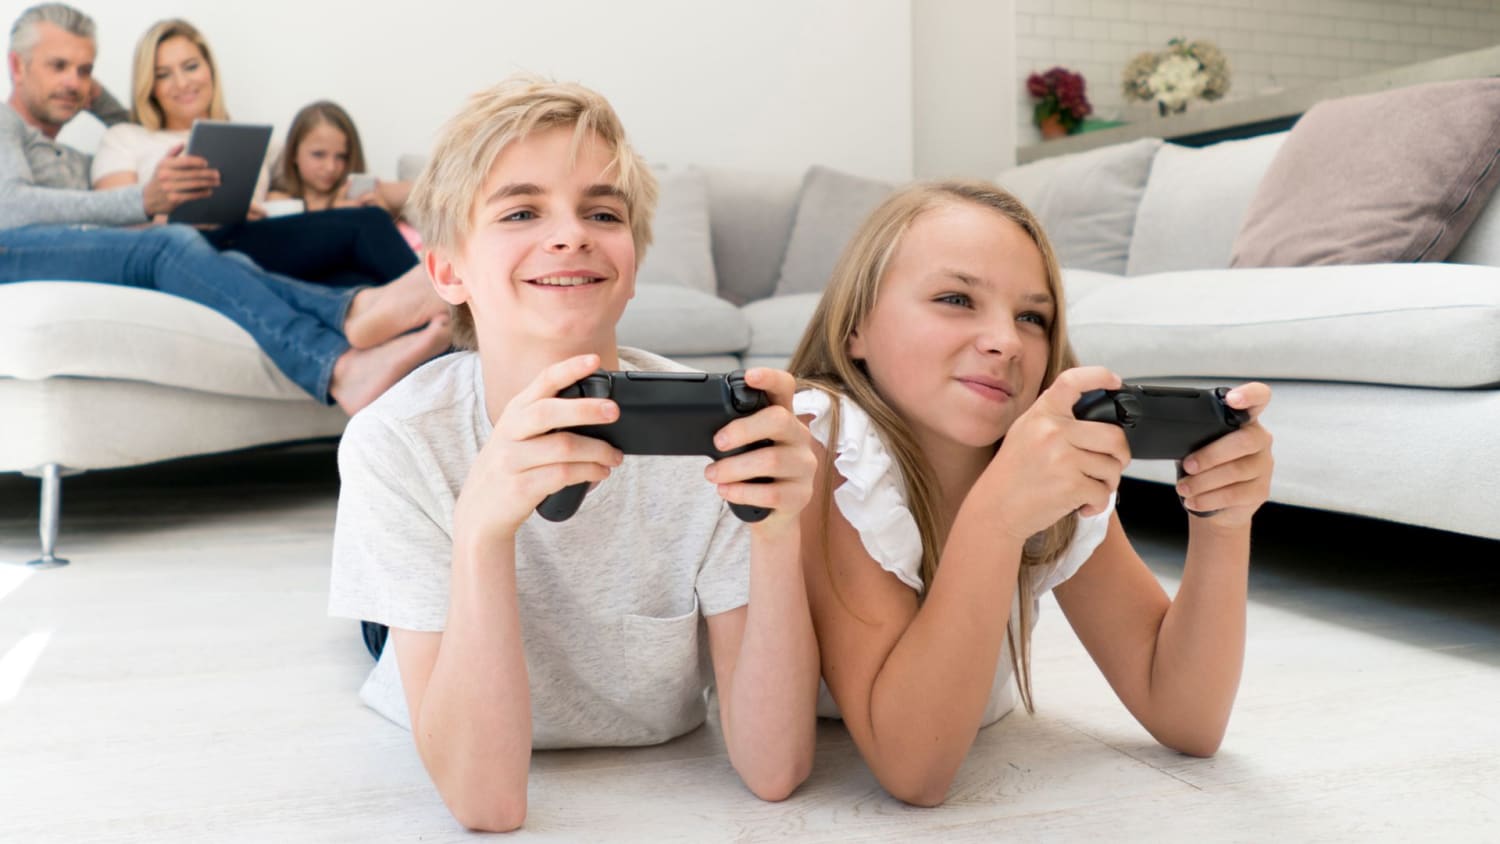 10 Fun Games for Kids to Play Completely Offline